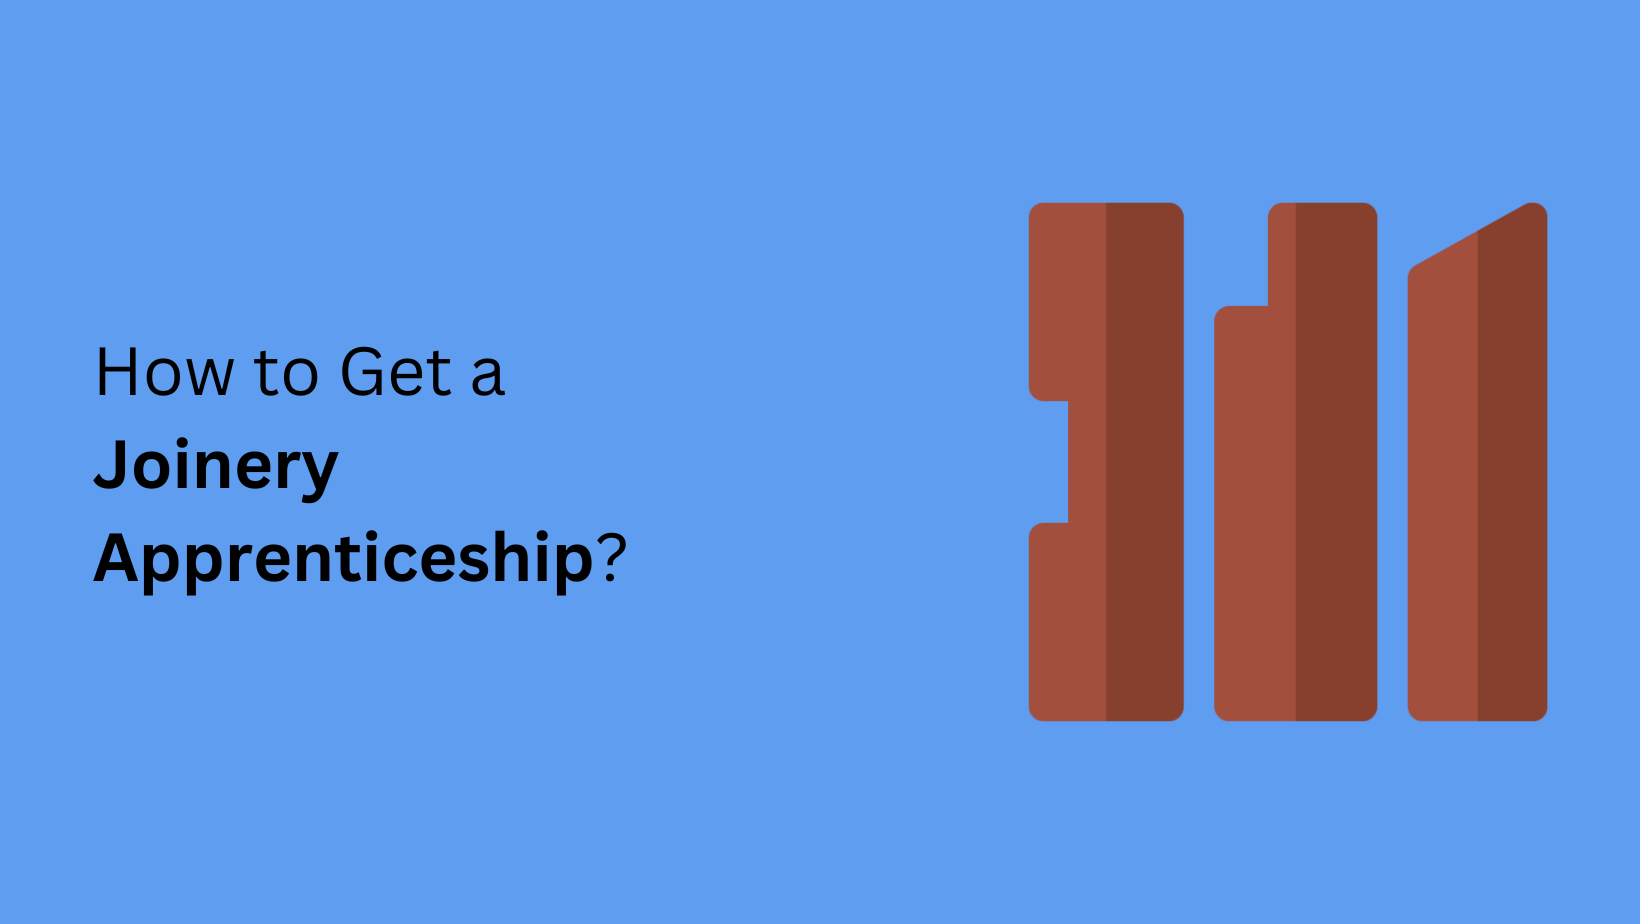 How to Get a Joinery Apprenticeship